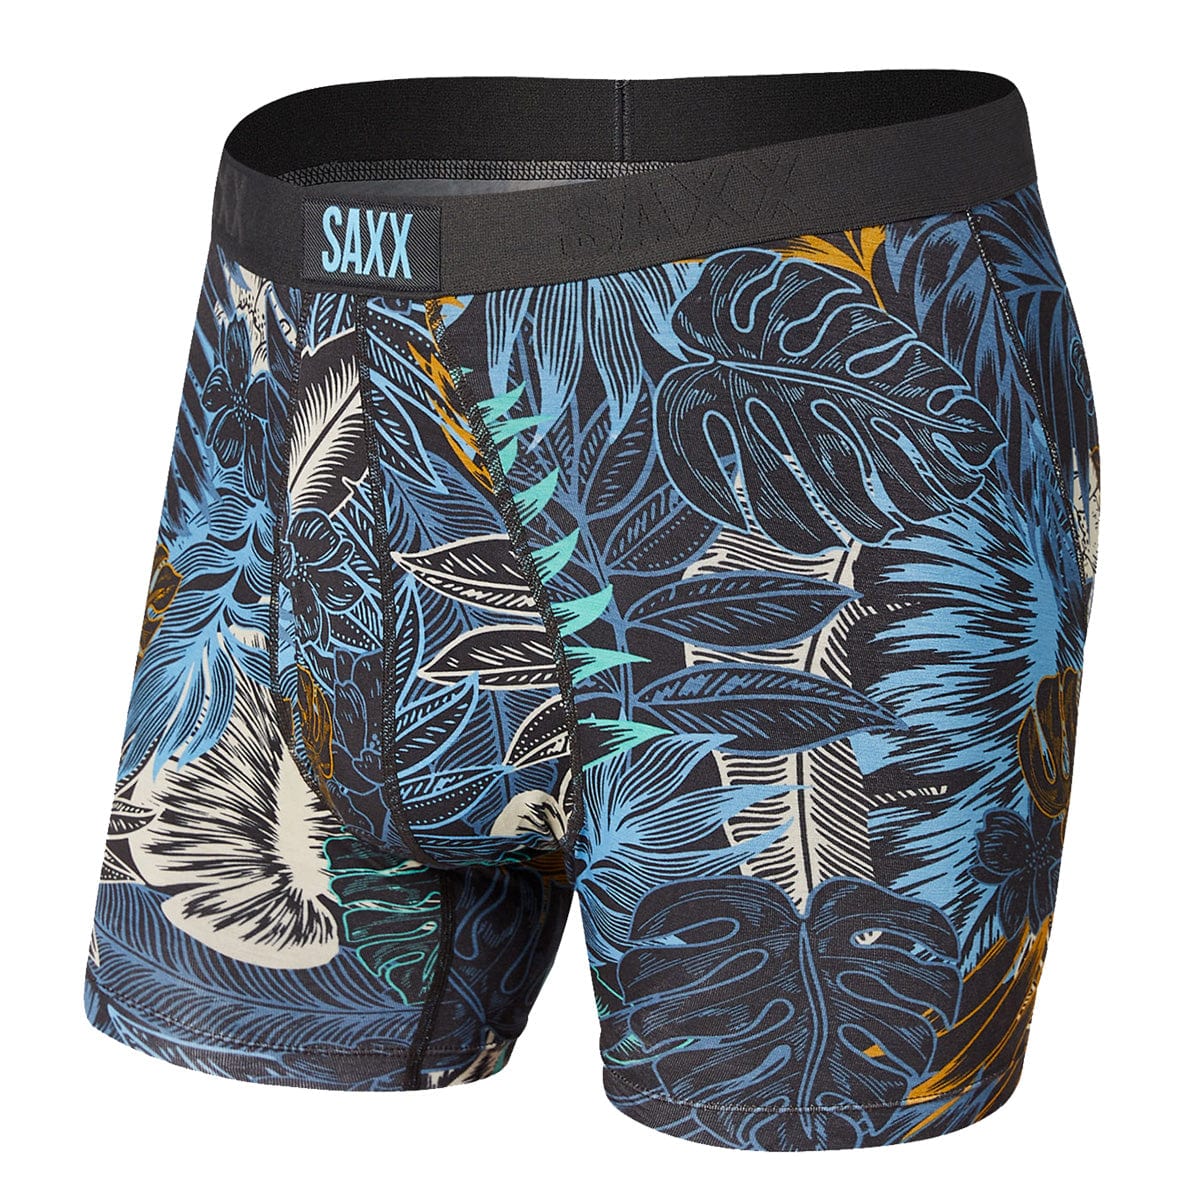 Saxx Ultra Boxers - Multi Havana - The Hockey Shop Source For Sports